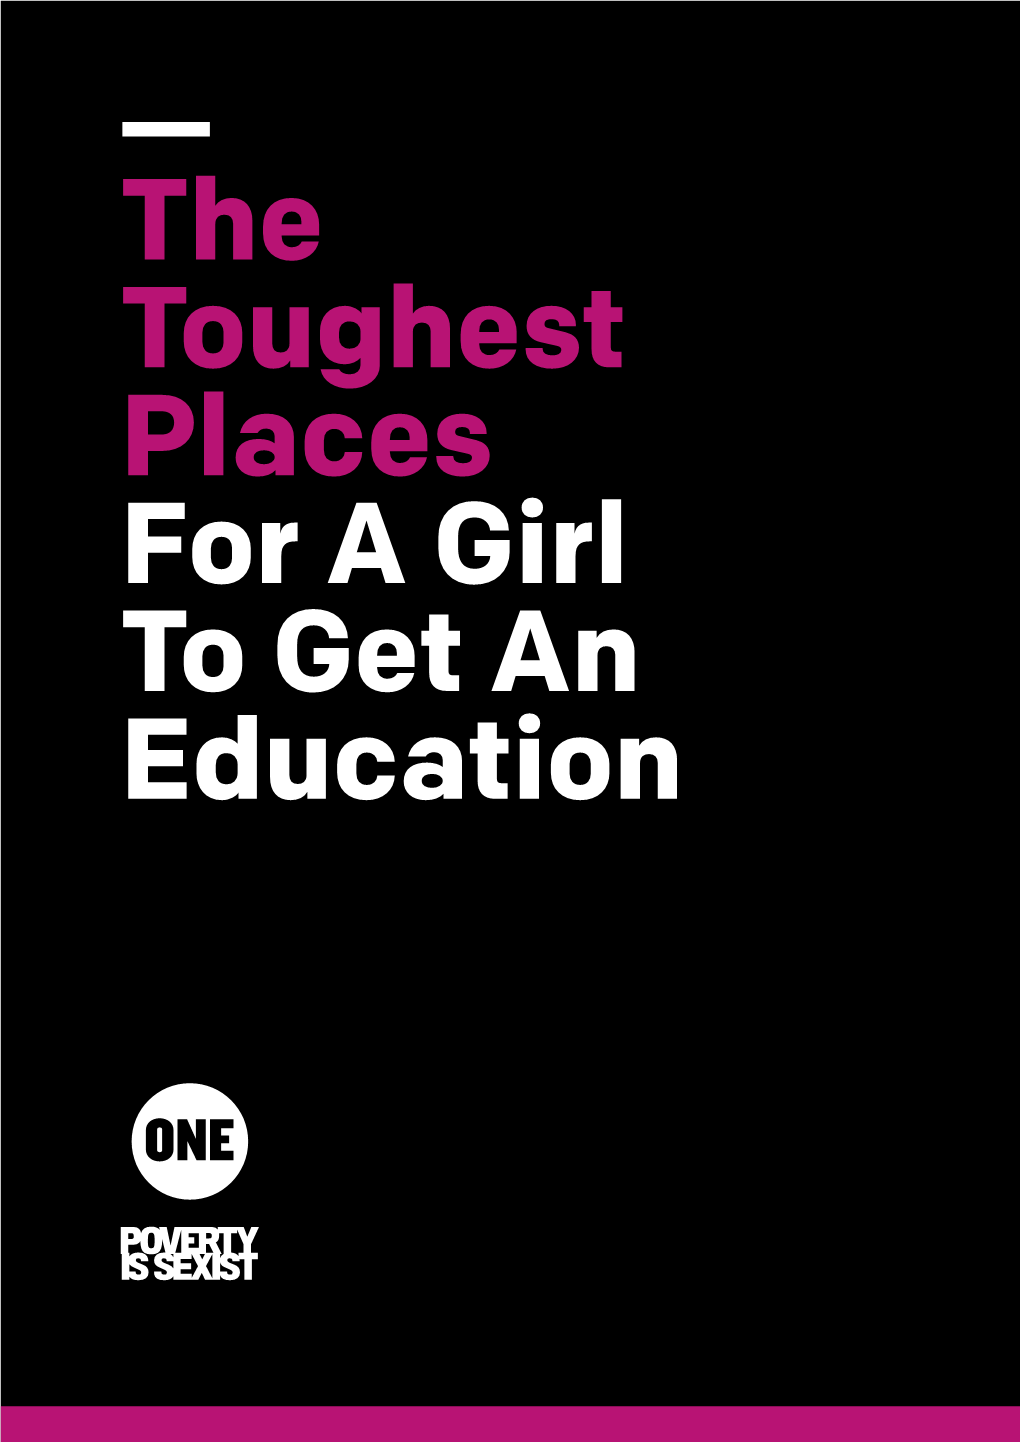 The Toughest Places for a Girl to Get an Education Educating Girls Can Change the World